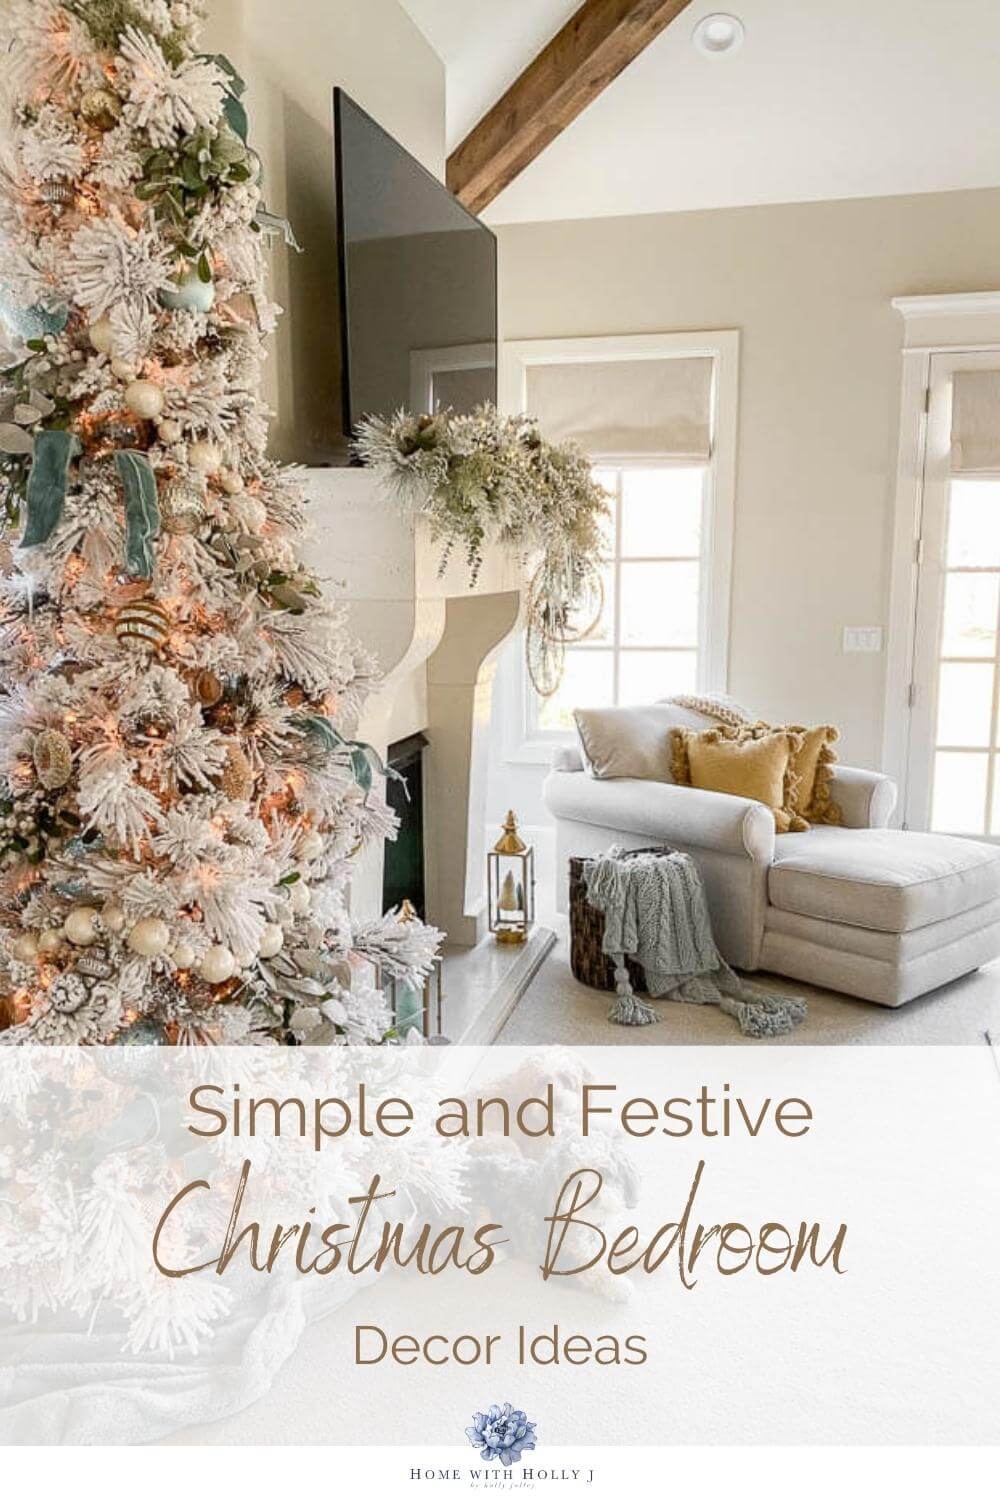 Create a festive Christmas bedroom with these simple decor ideas. Check out all my favorite ways to add charm this holiday.